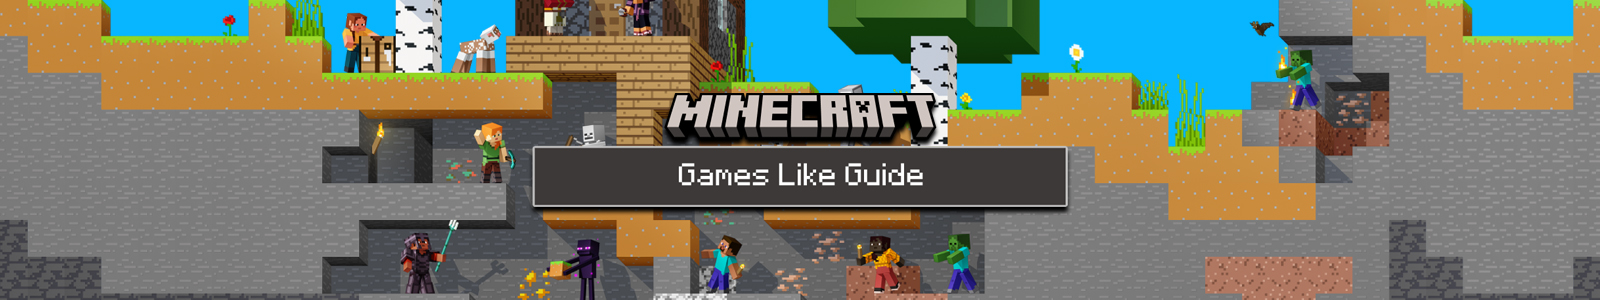 Minecraft Story Mode games like guide